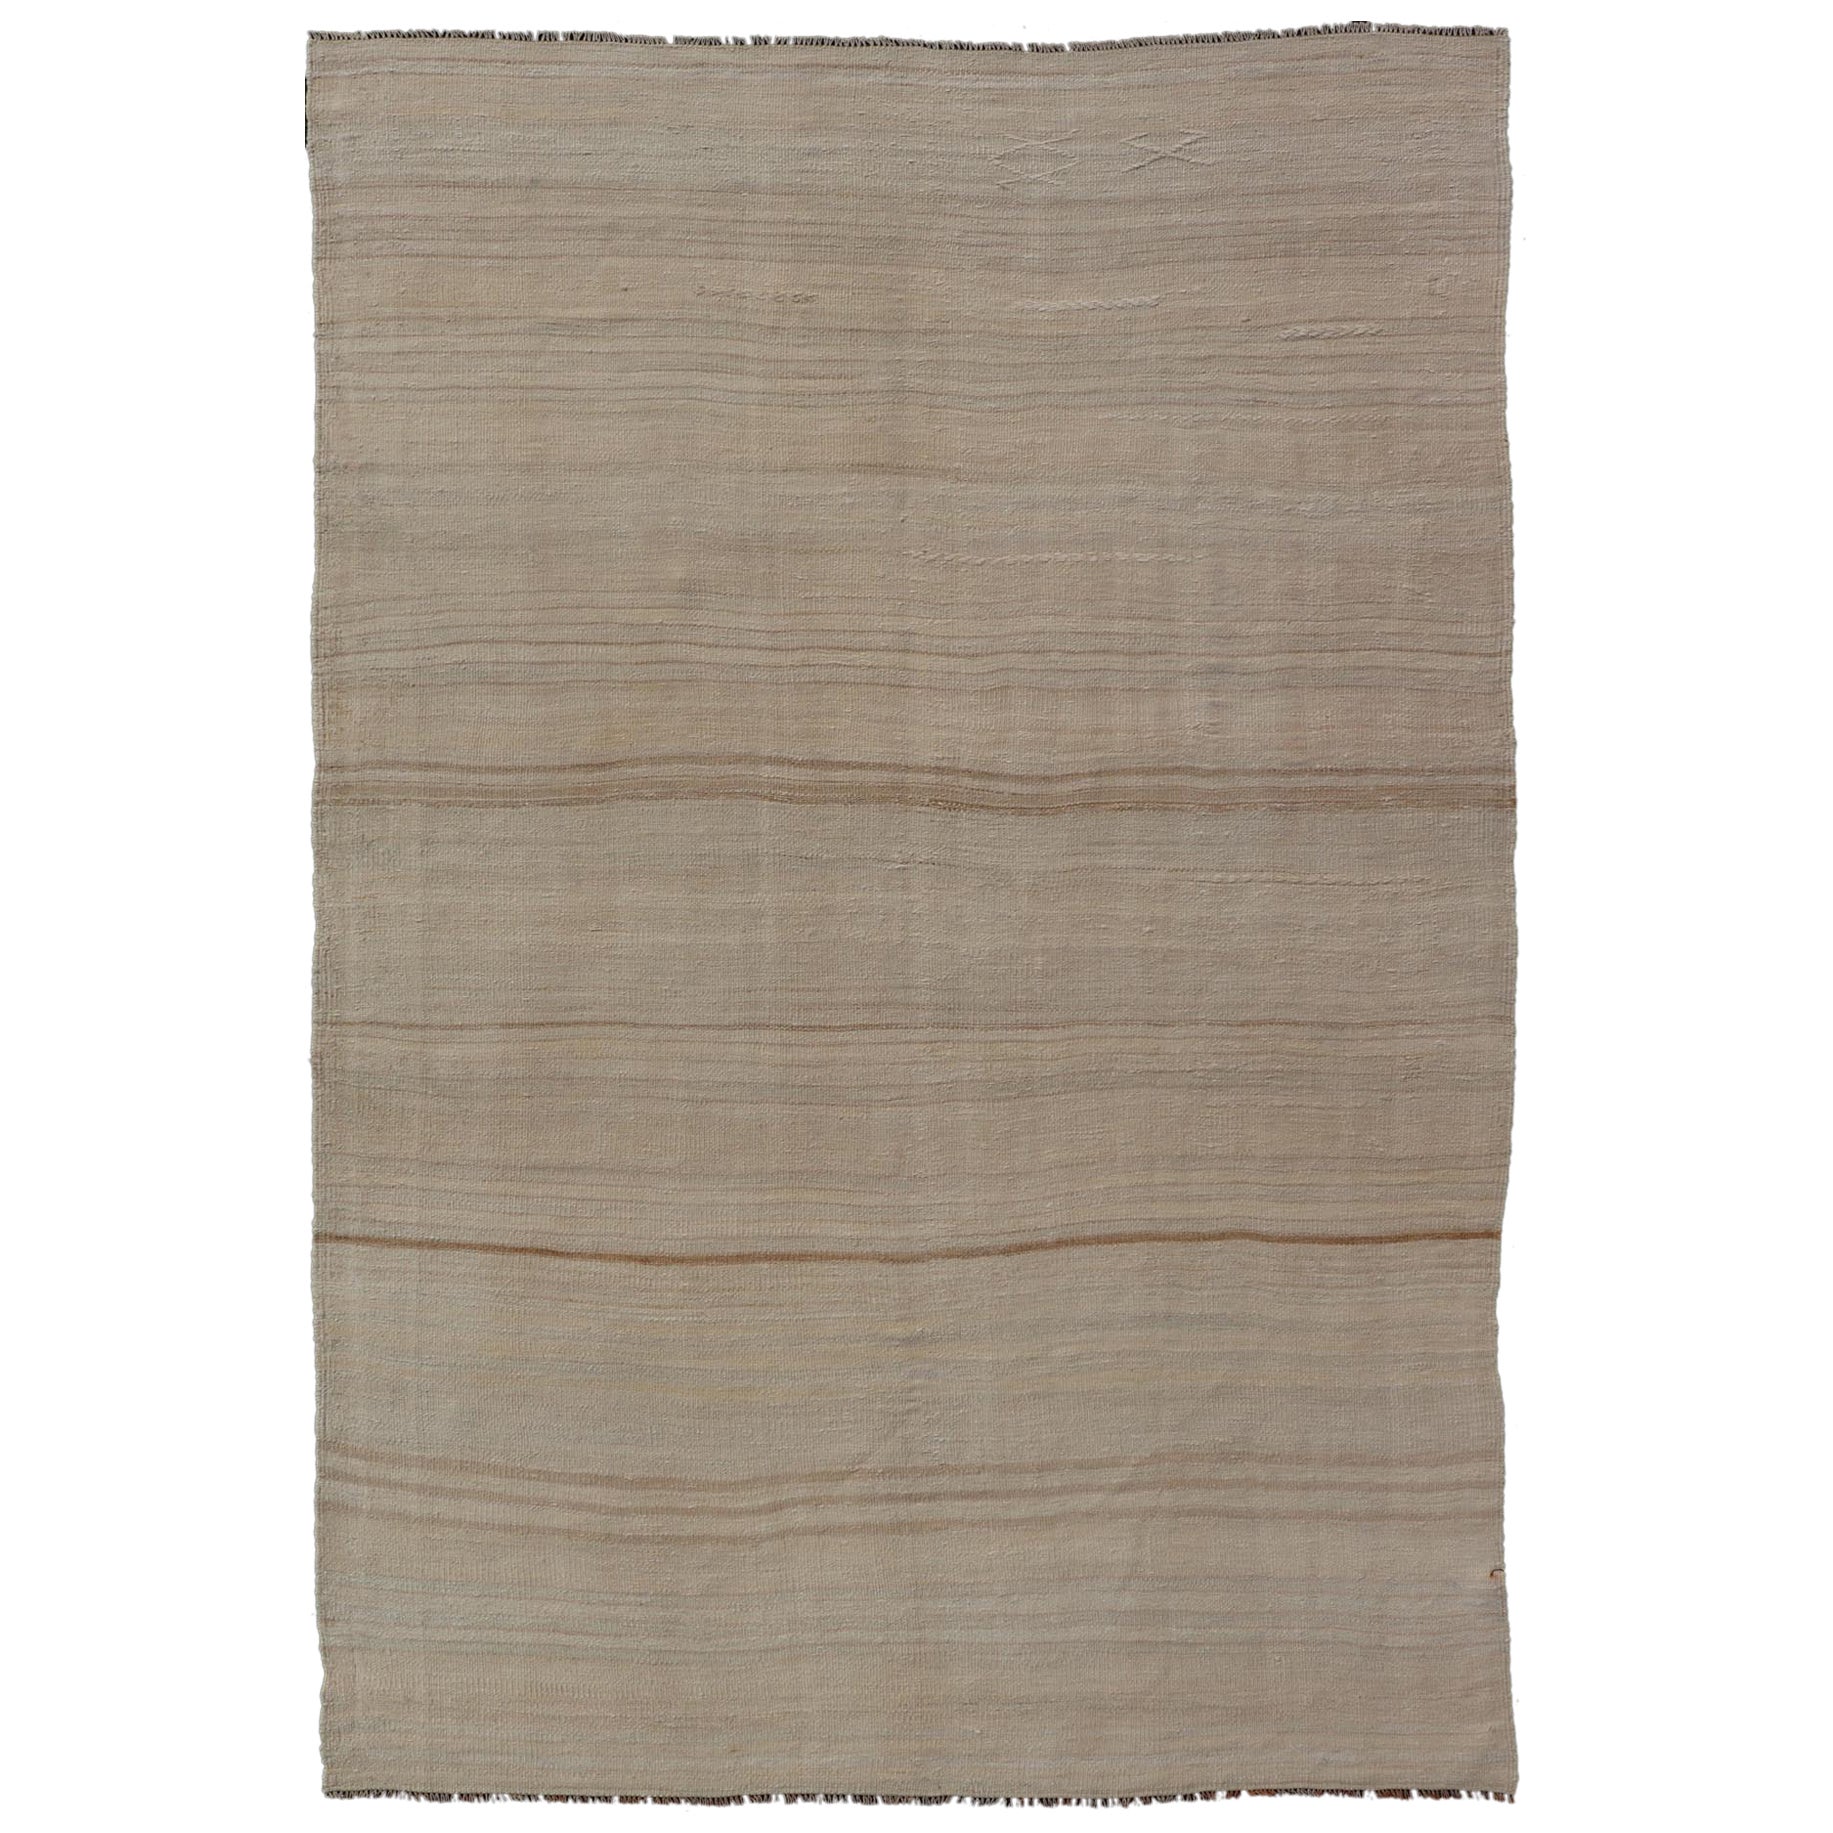 Turkish Hand Woven Vintage Kilim Rug with in Tan, Taupe, Brown, and Earth Tones For Sale